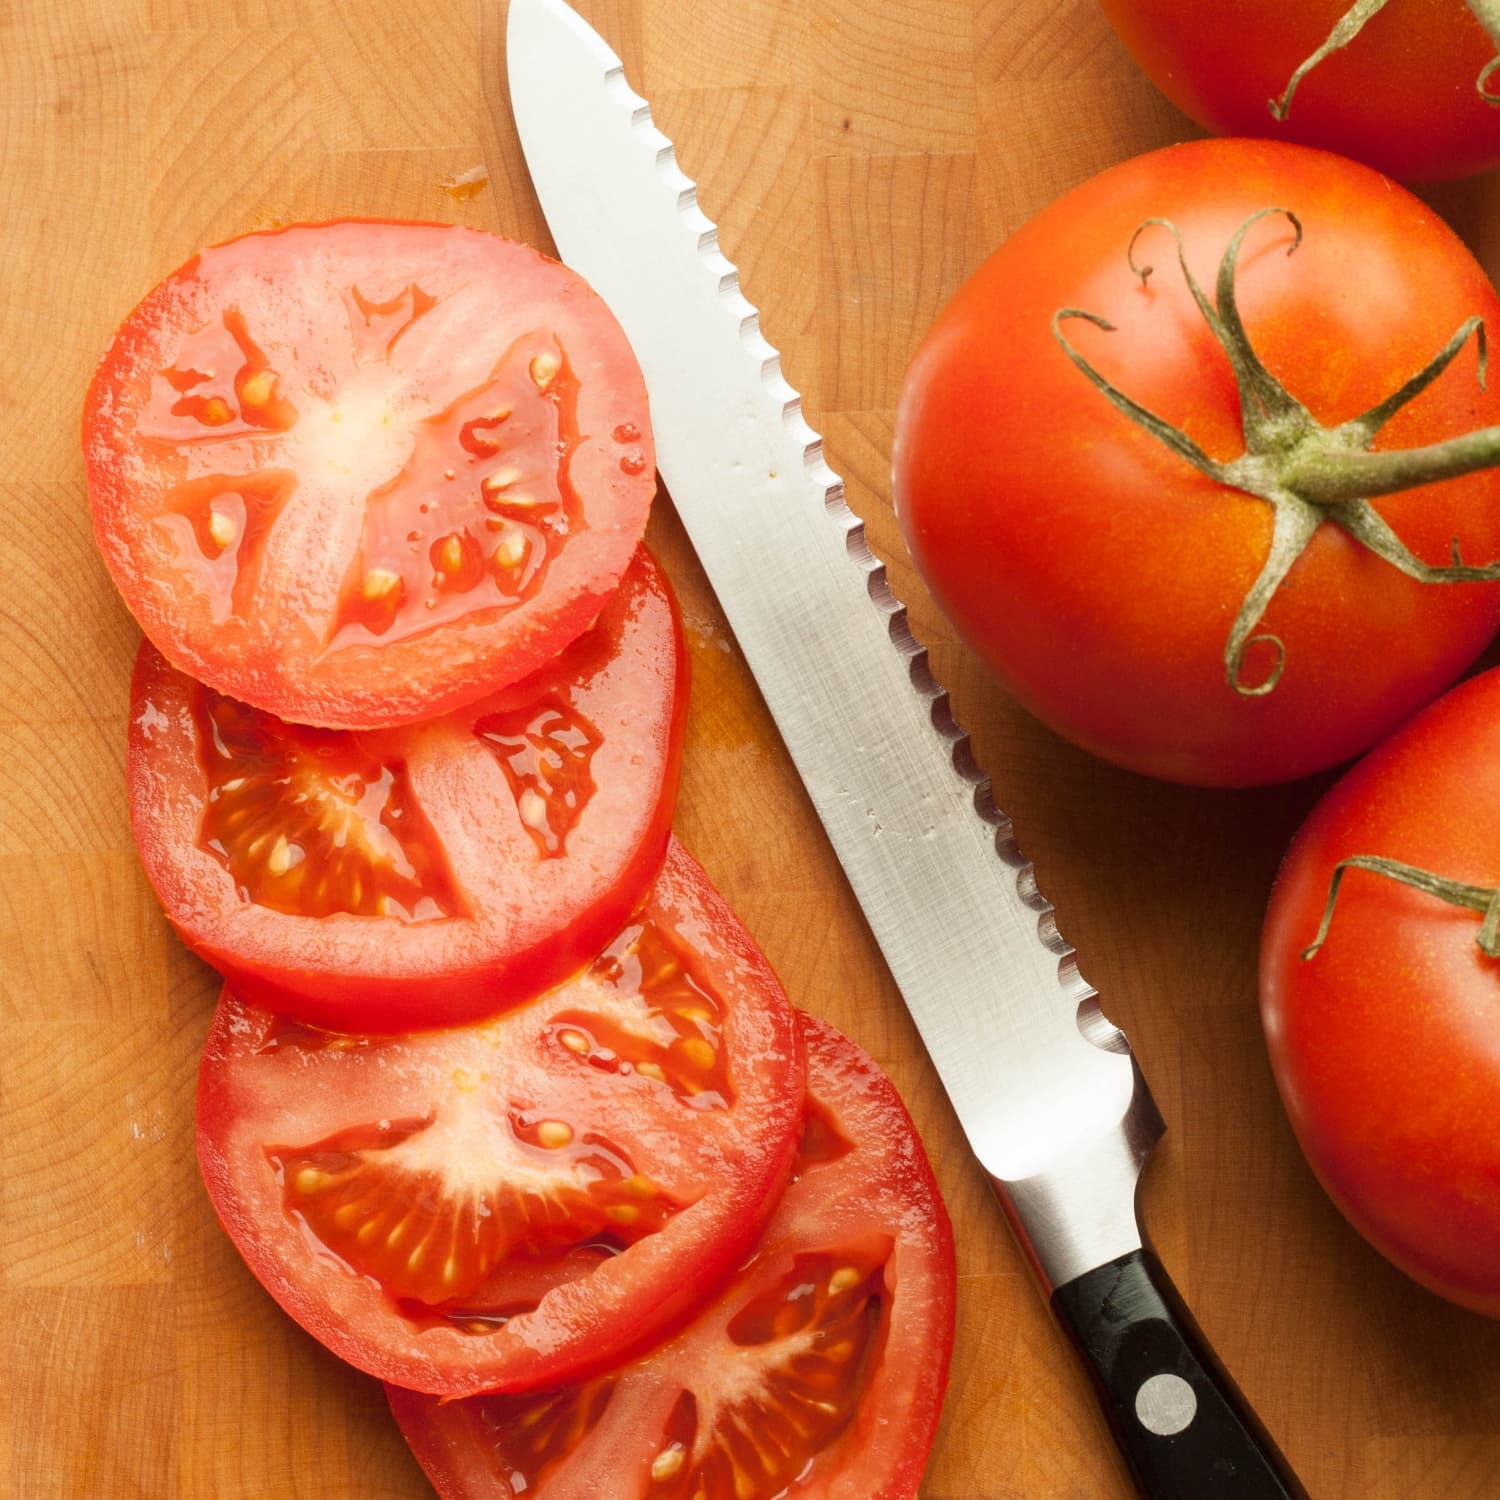 Why a Serrated Knife Is the Best Tool to Slice Tomatoes